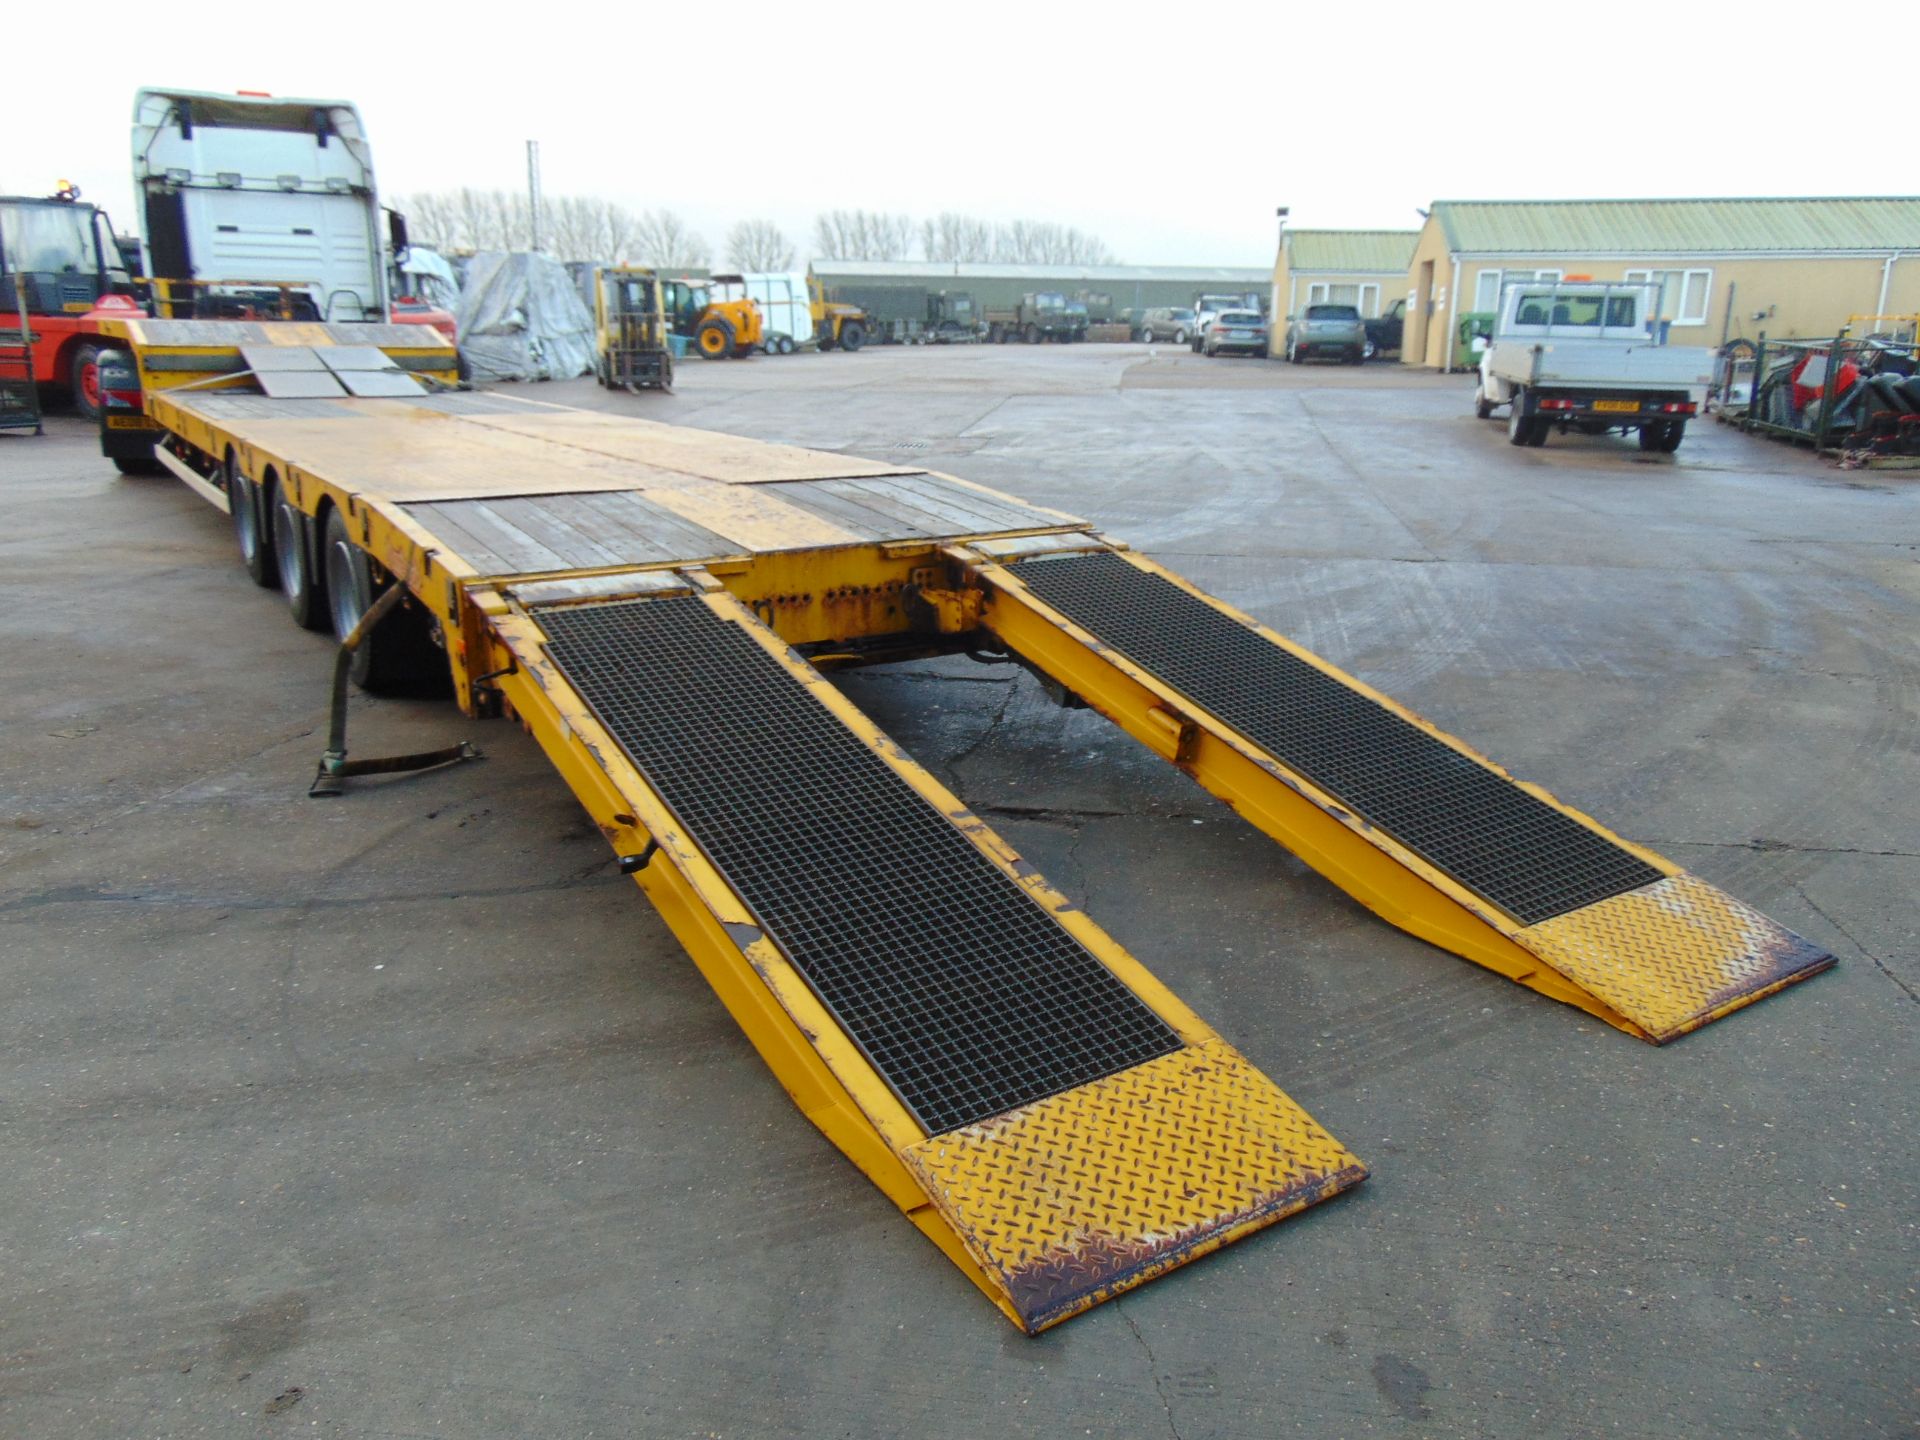 2010 Nooteboom OSDS 48-03 Tri Axle Low Loader Trailer - Image 5 of 24